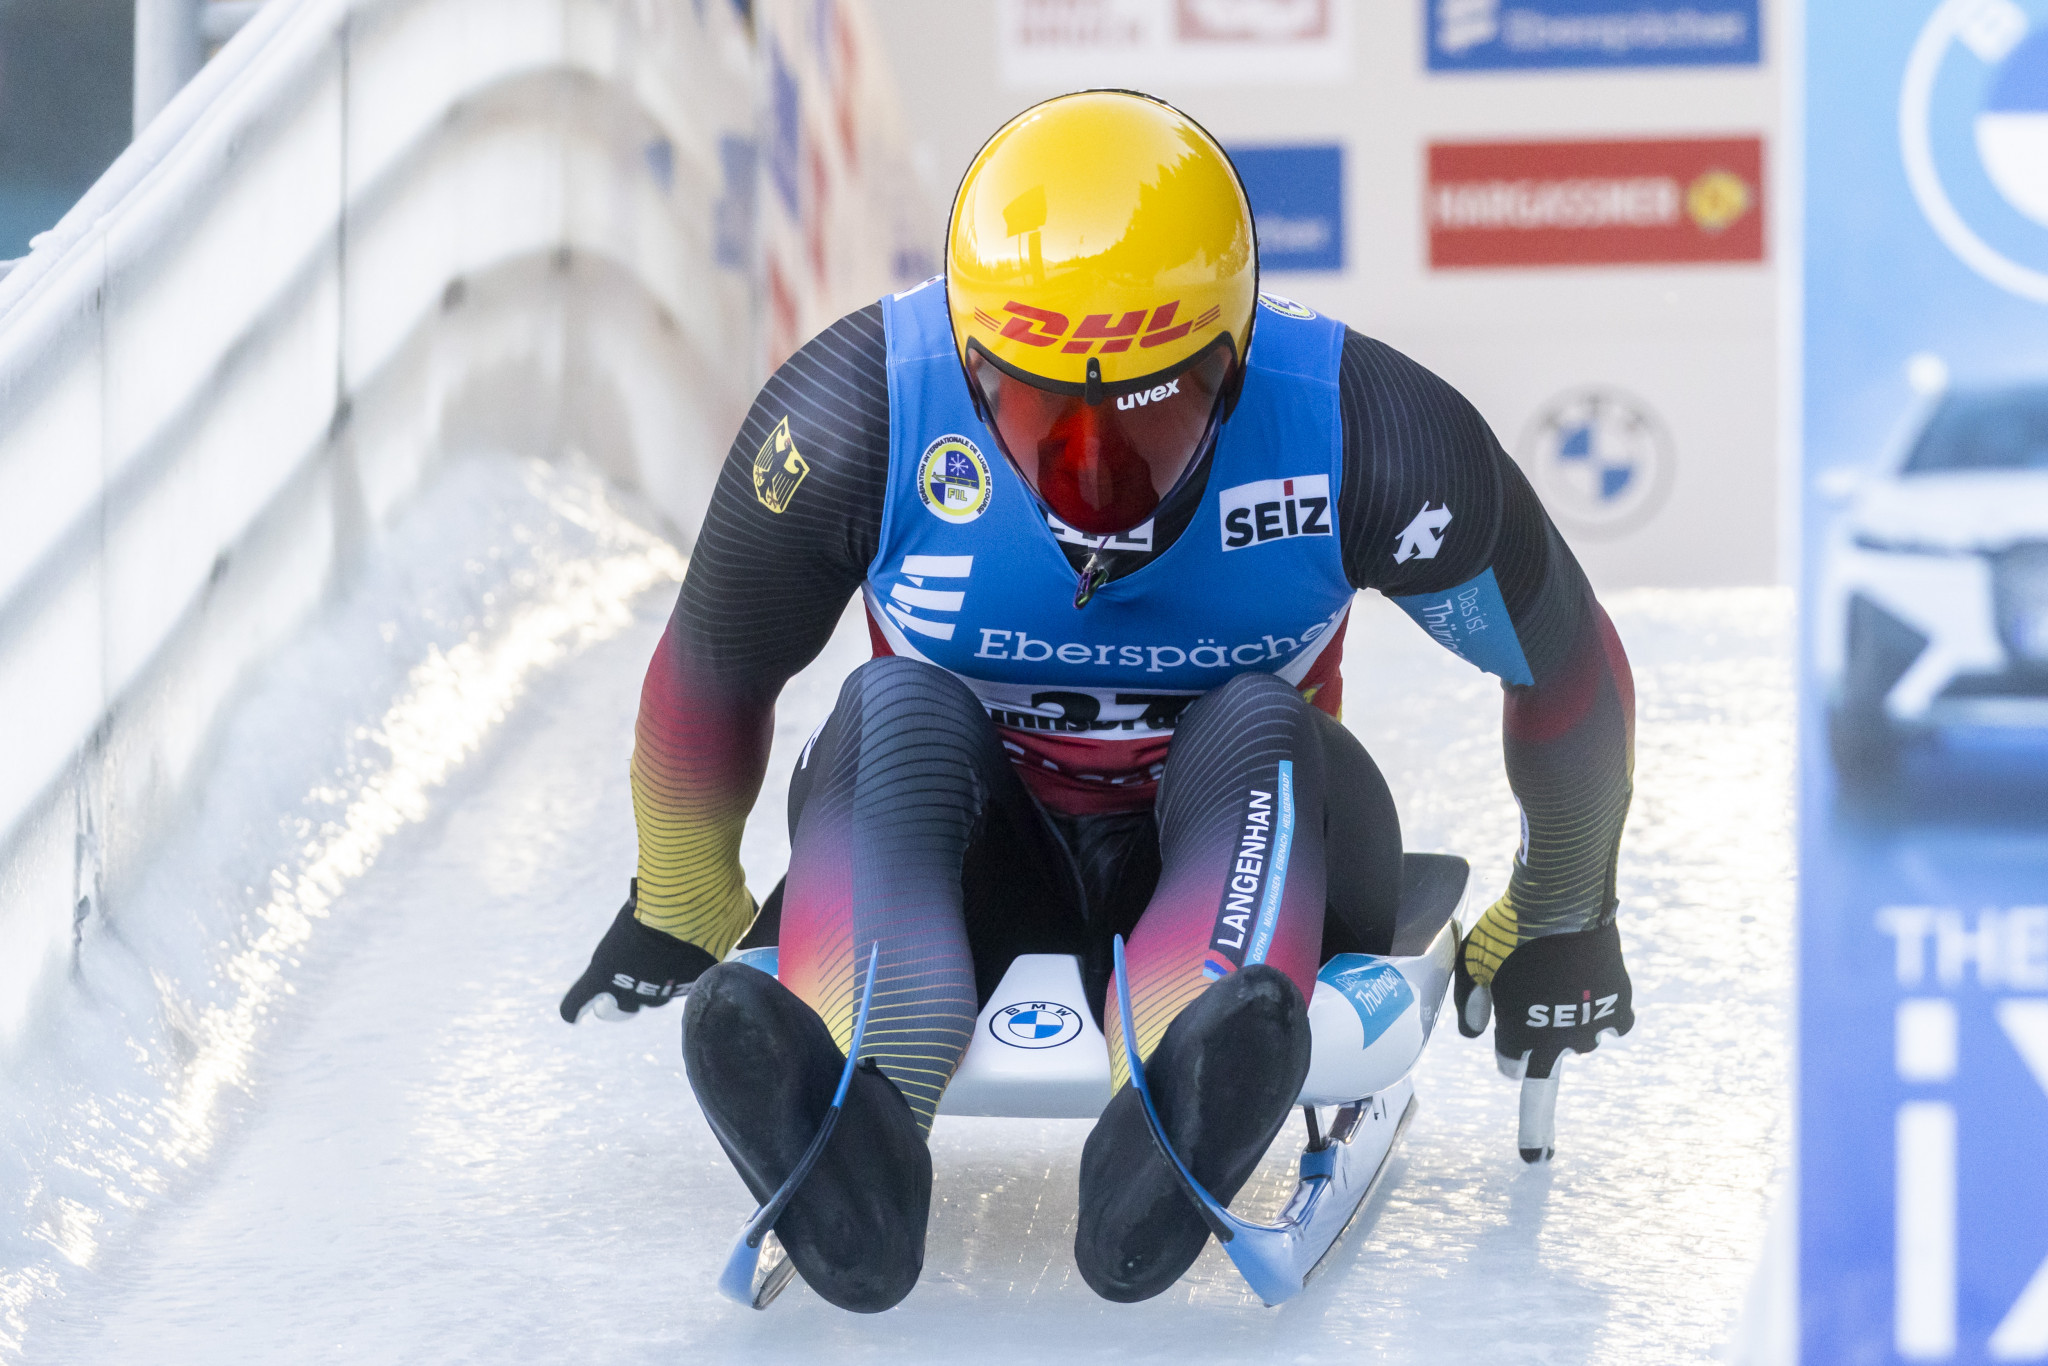 Langenhan makes it back-to-back Luge World Cup wins on home ice in Altenberg